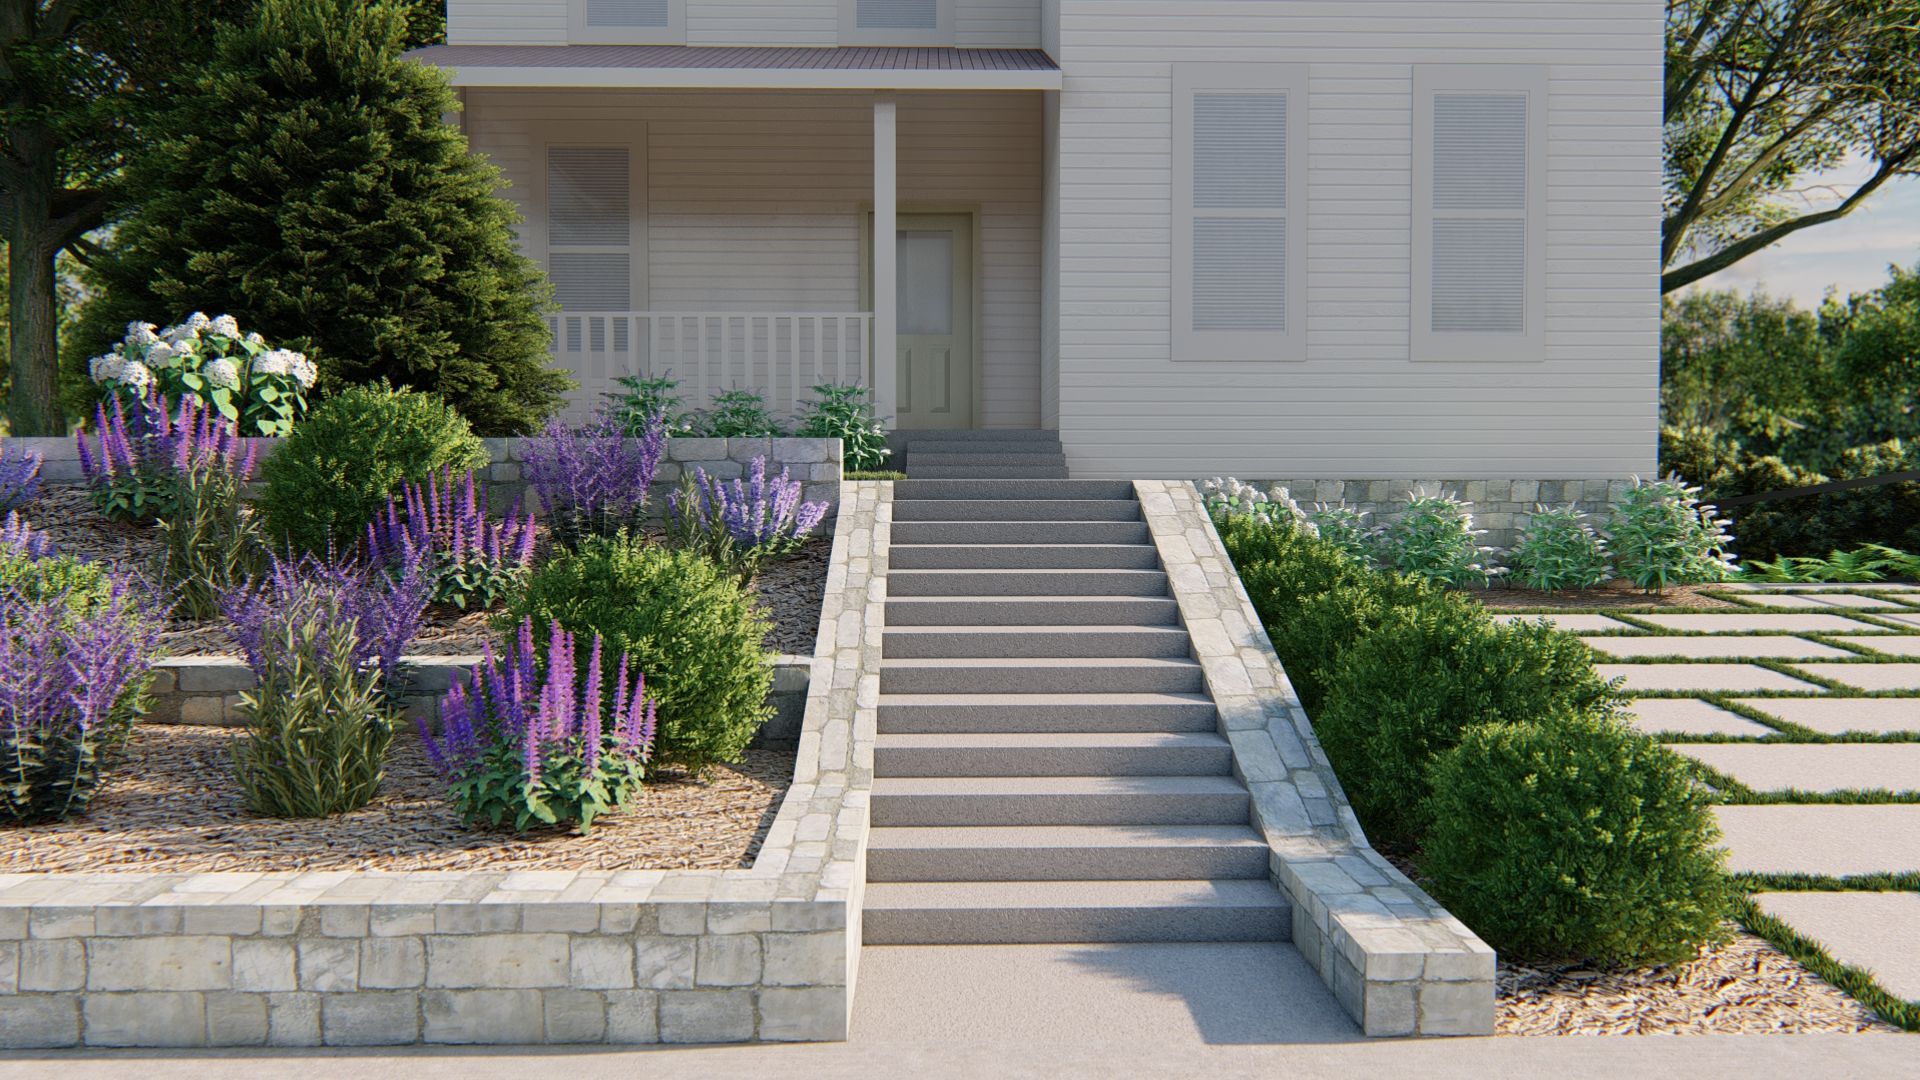 front yard landscaping ideas, a concrete walkway surrounded by flower beds with perennials and annuals 